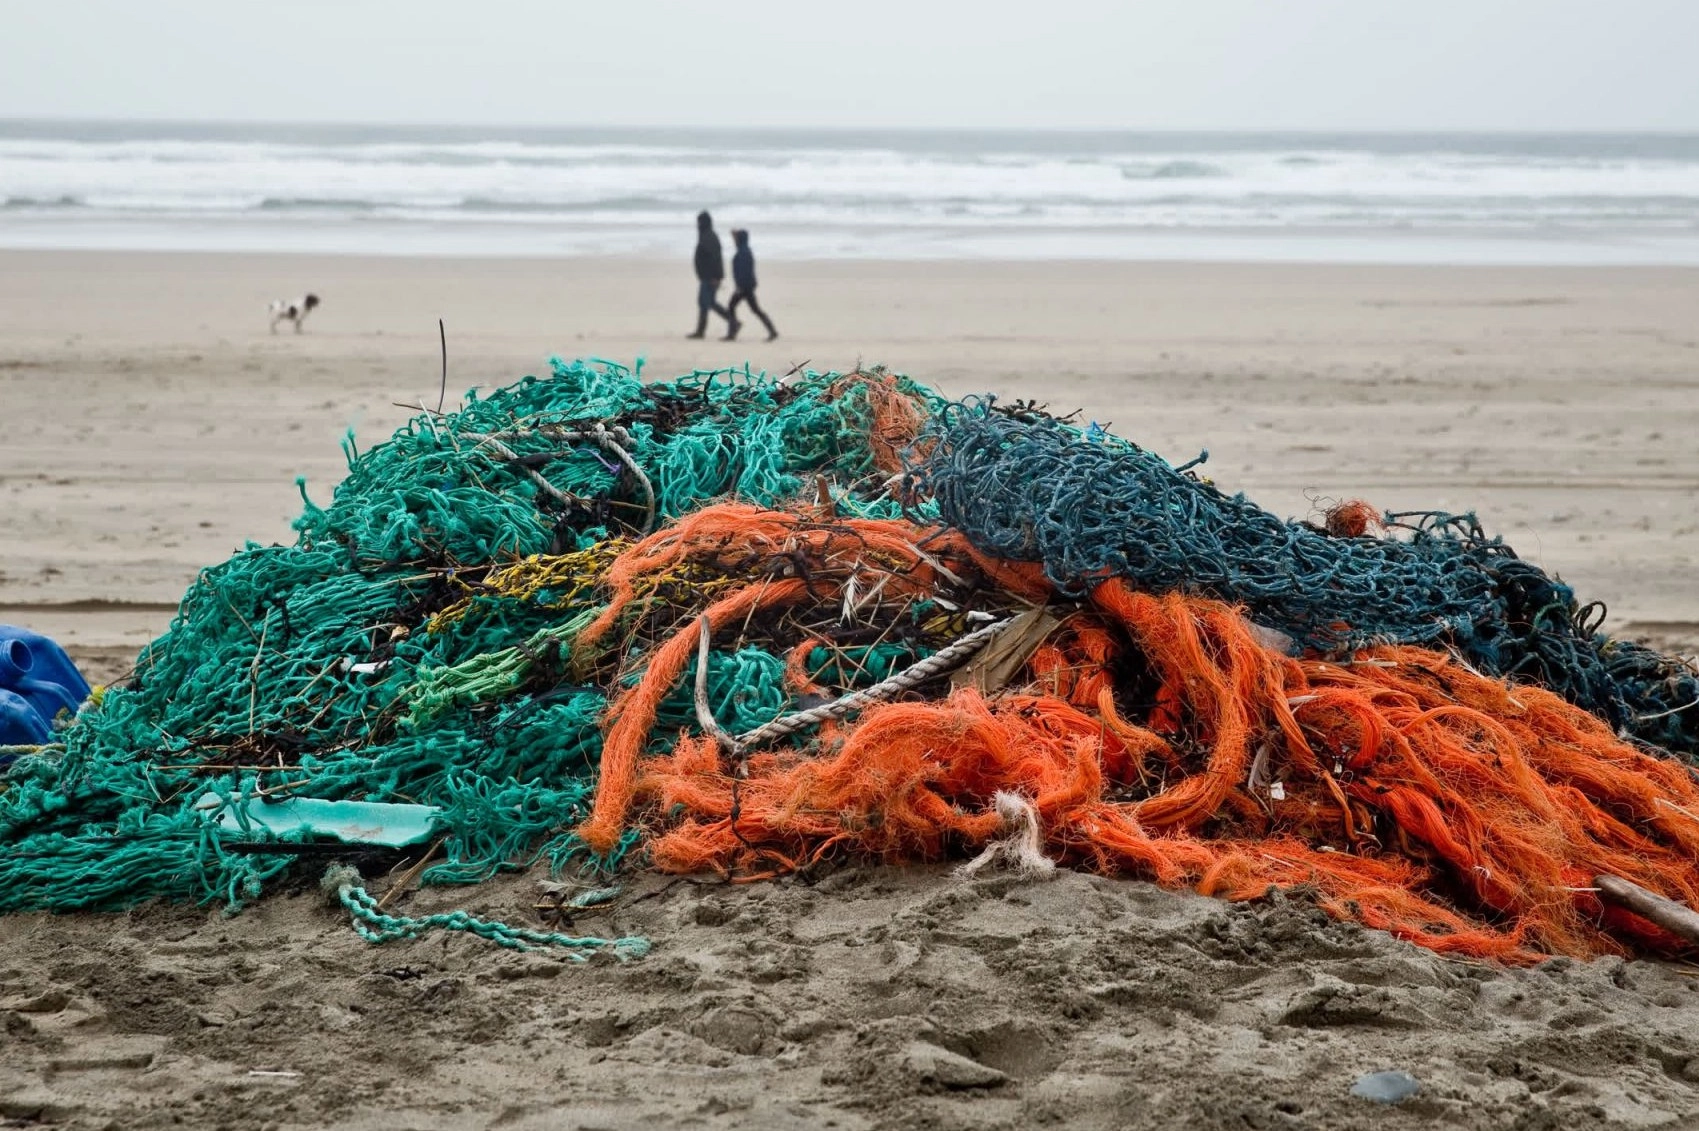 Ghost gear found after a beach clean in Cornwall, UK - Sea Change - World Animal Protection